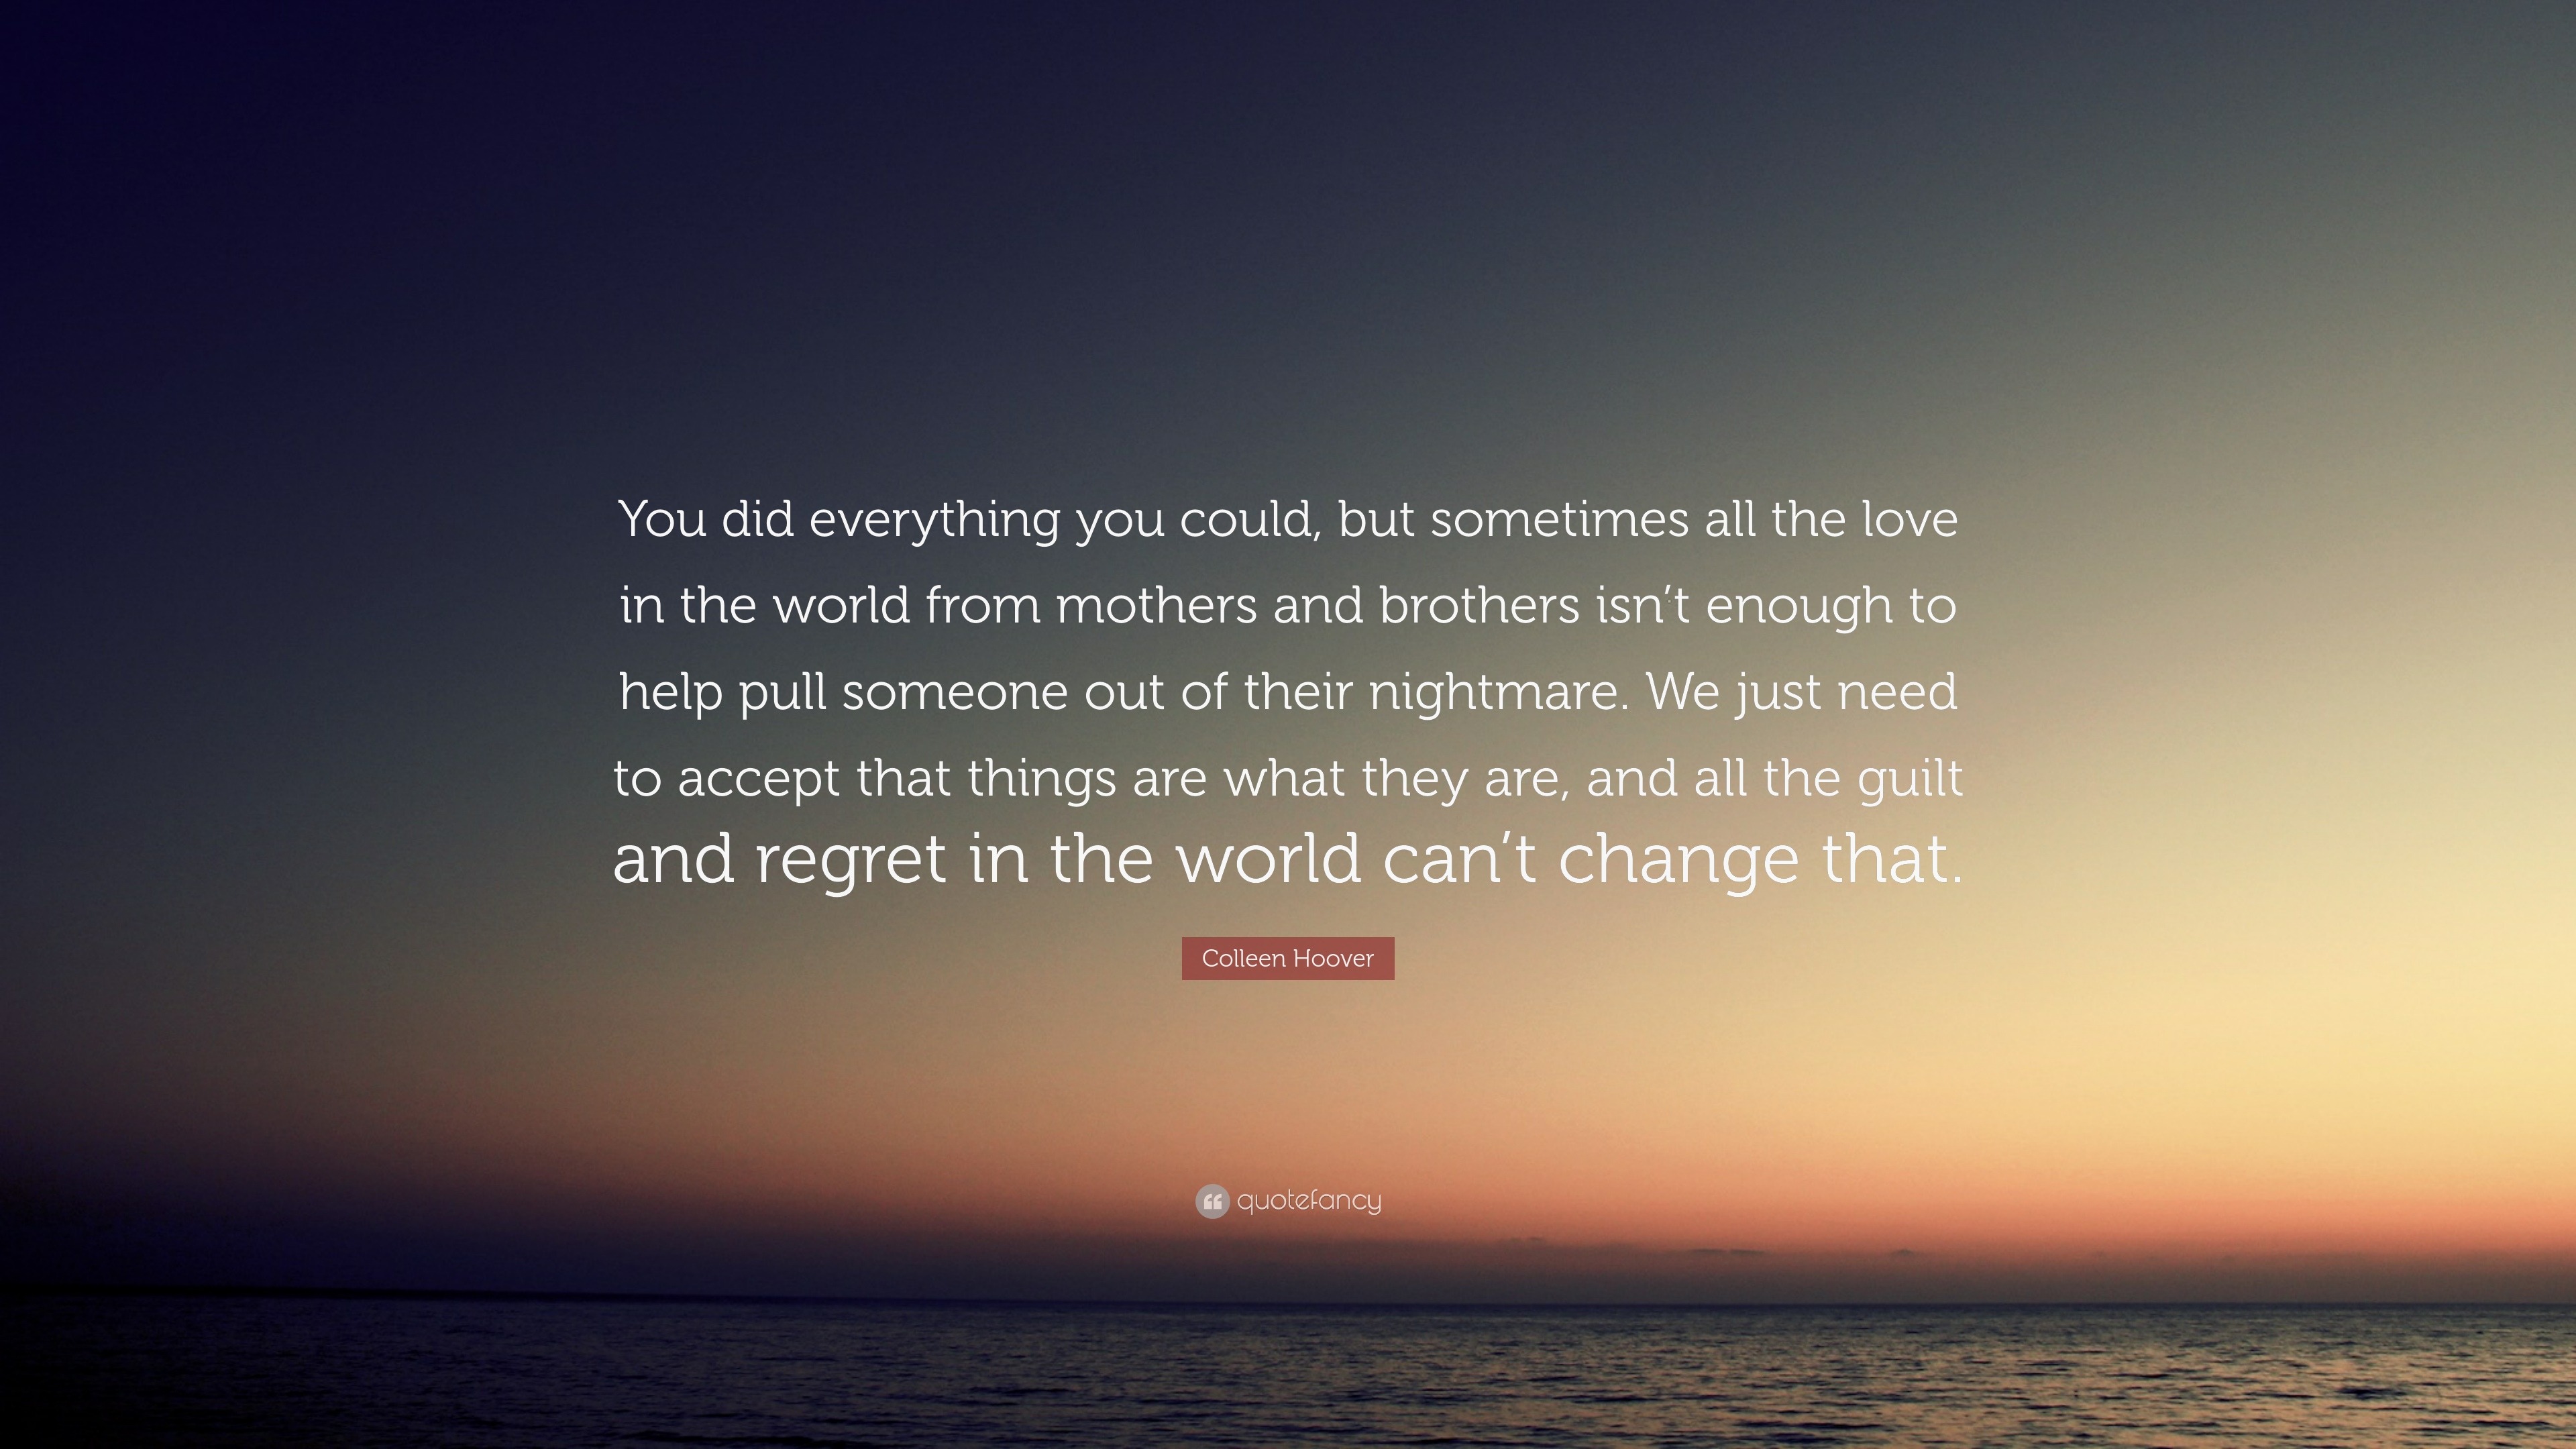 Colleen Hoover Quote “You did everything you could but sometimes all the love